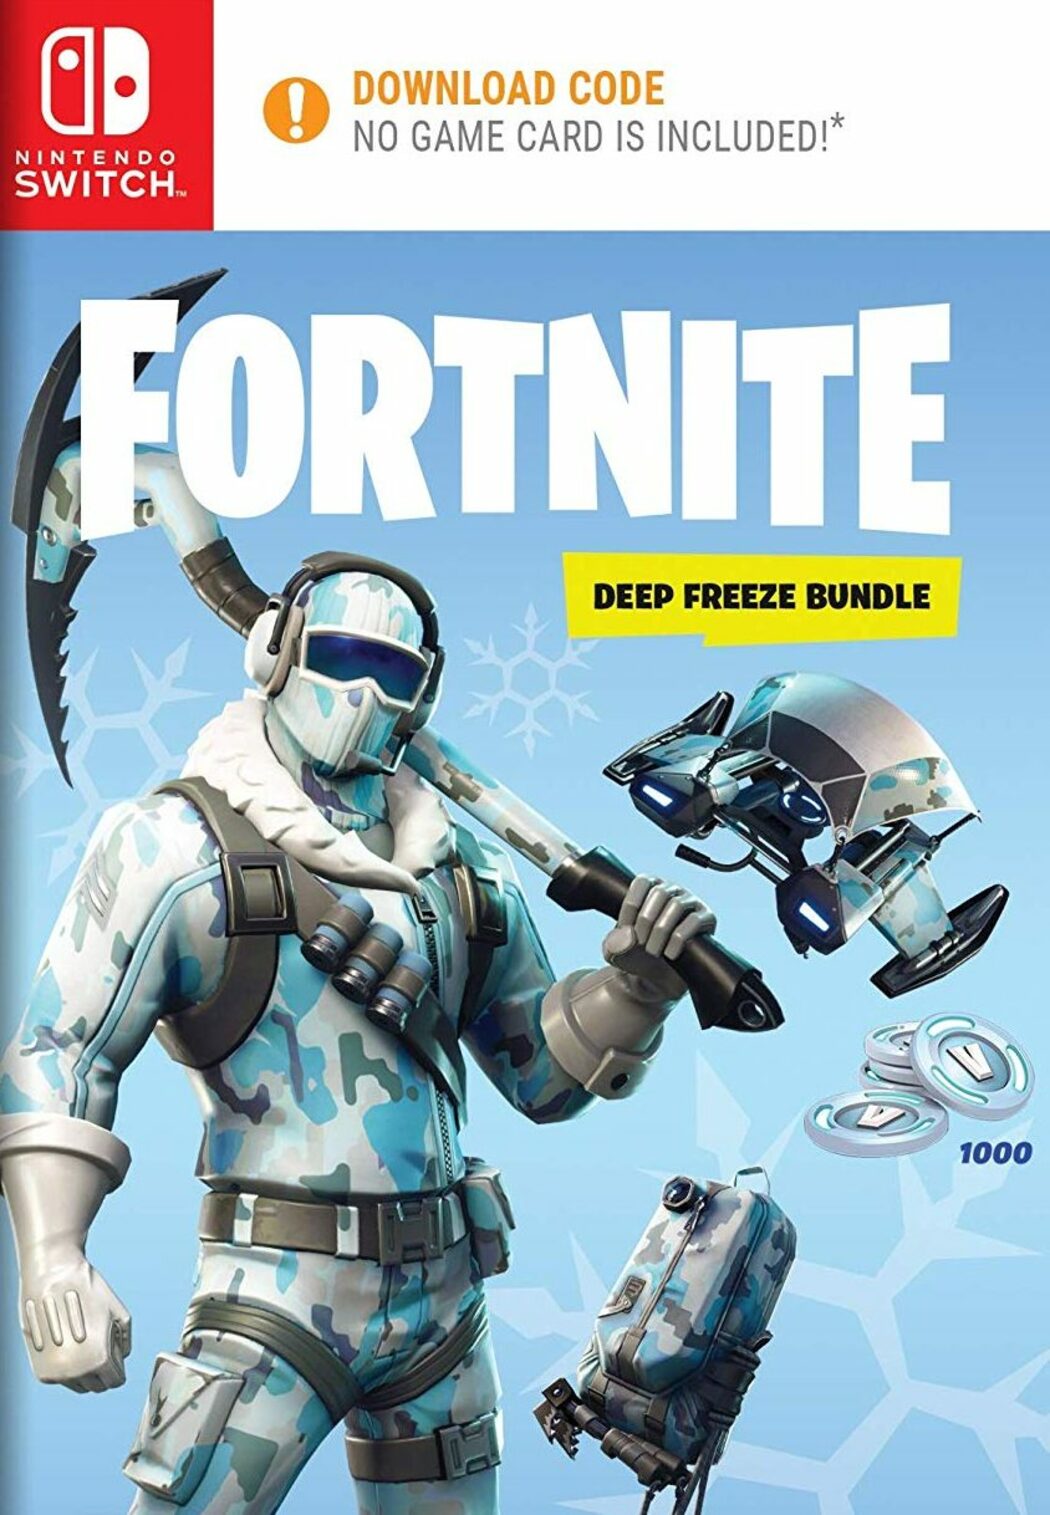 does fortnite come with nintendo switch